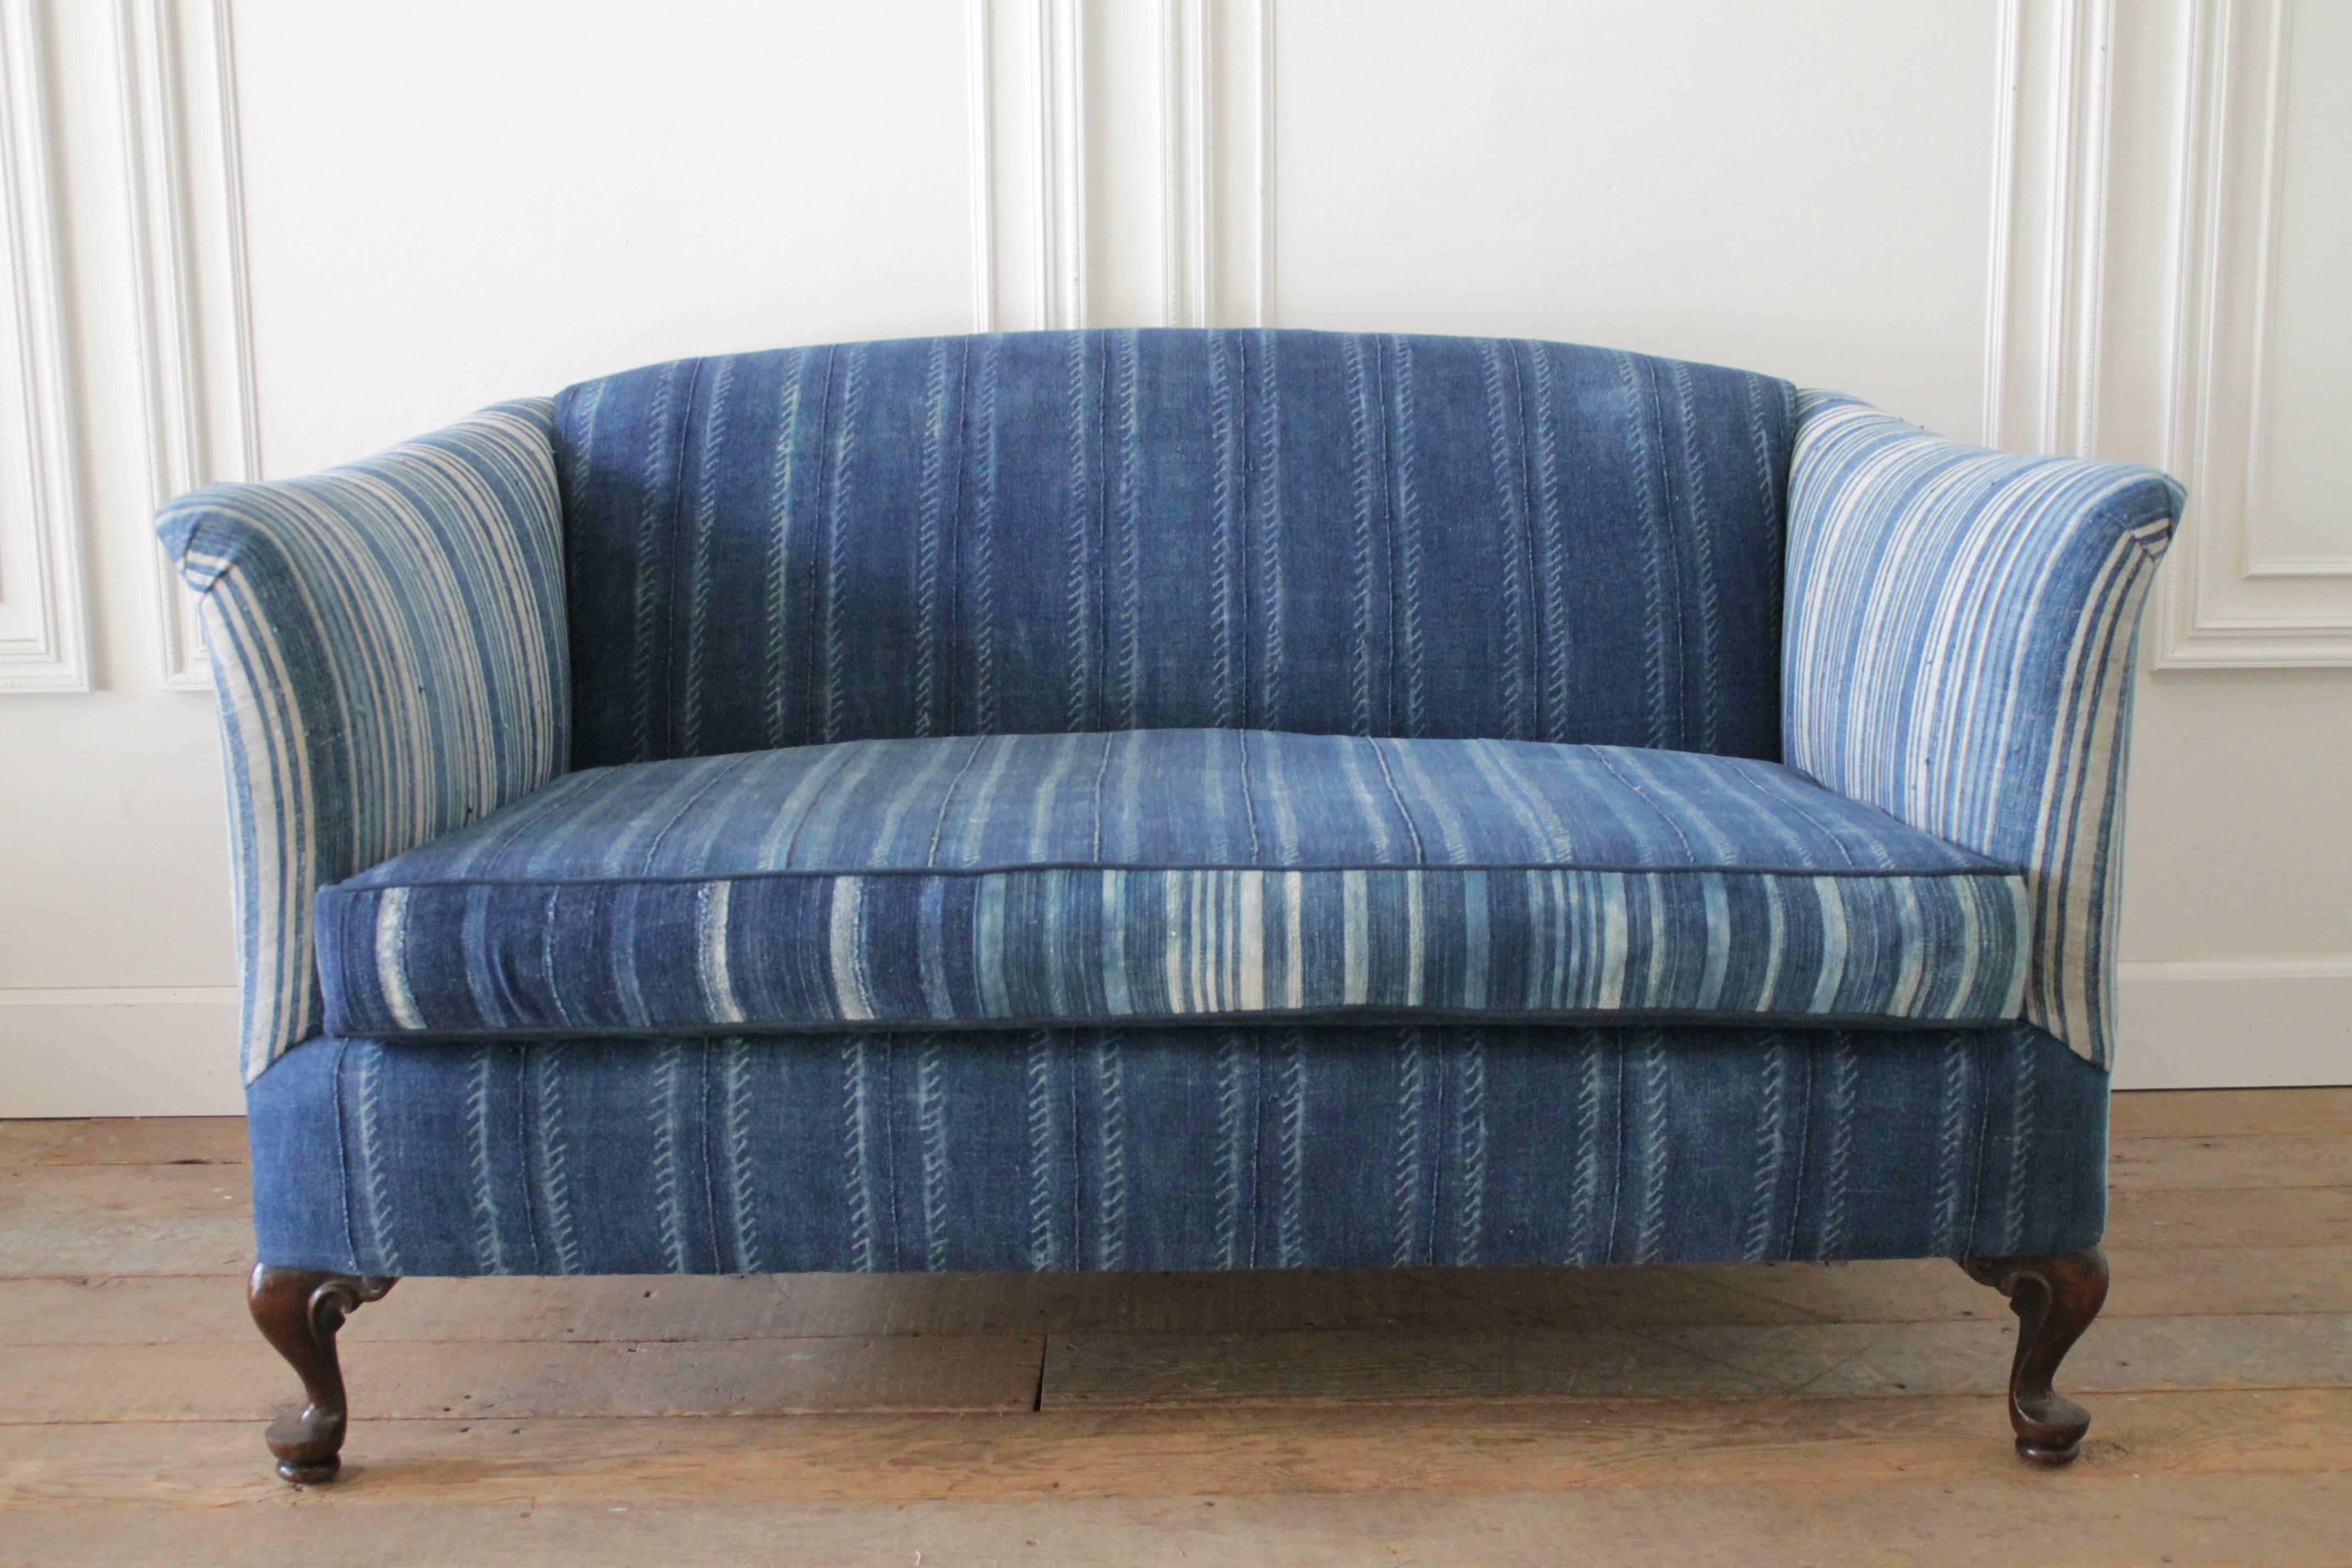 Vintage settee circa 1940 we reupholstered in these beautiful indigo African mud cloths. Thick and heavier weight, with multi tonal stripes and patens.
This settee is very comfortable and ready for everyday use. Perfect for a beach house, play